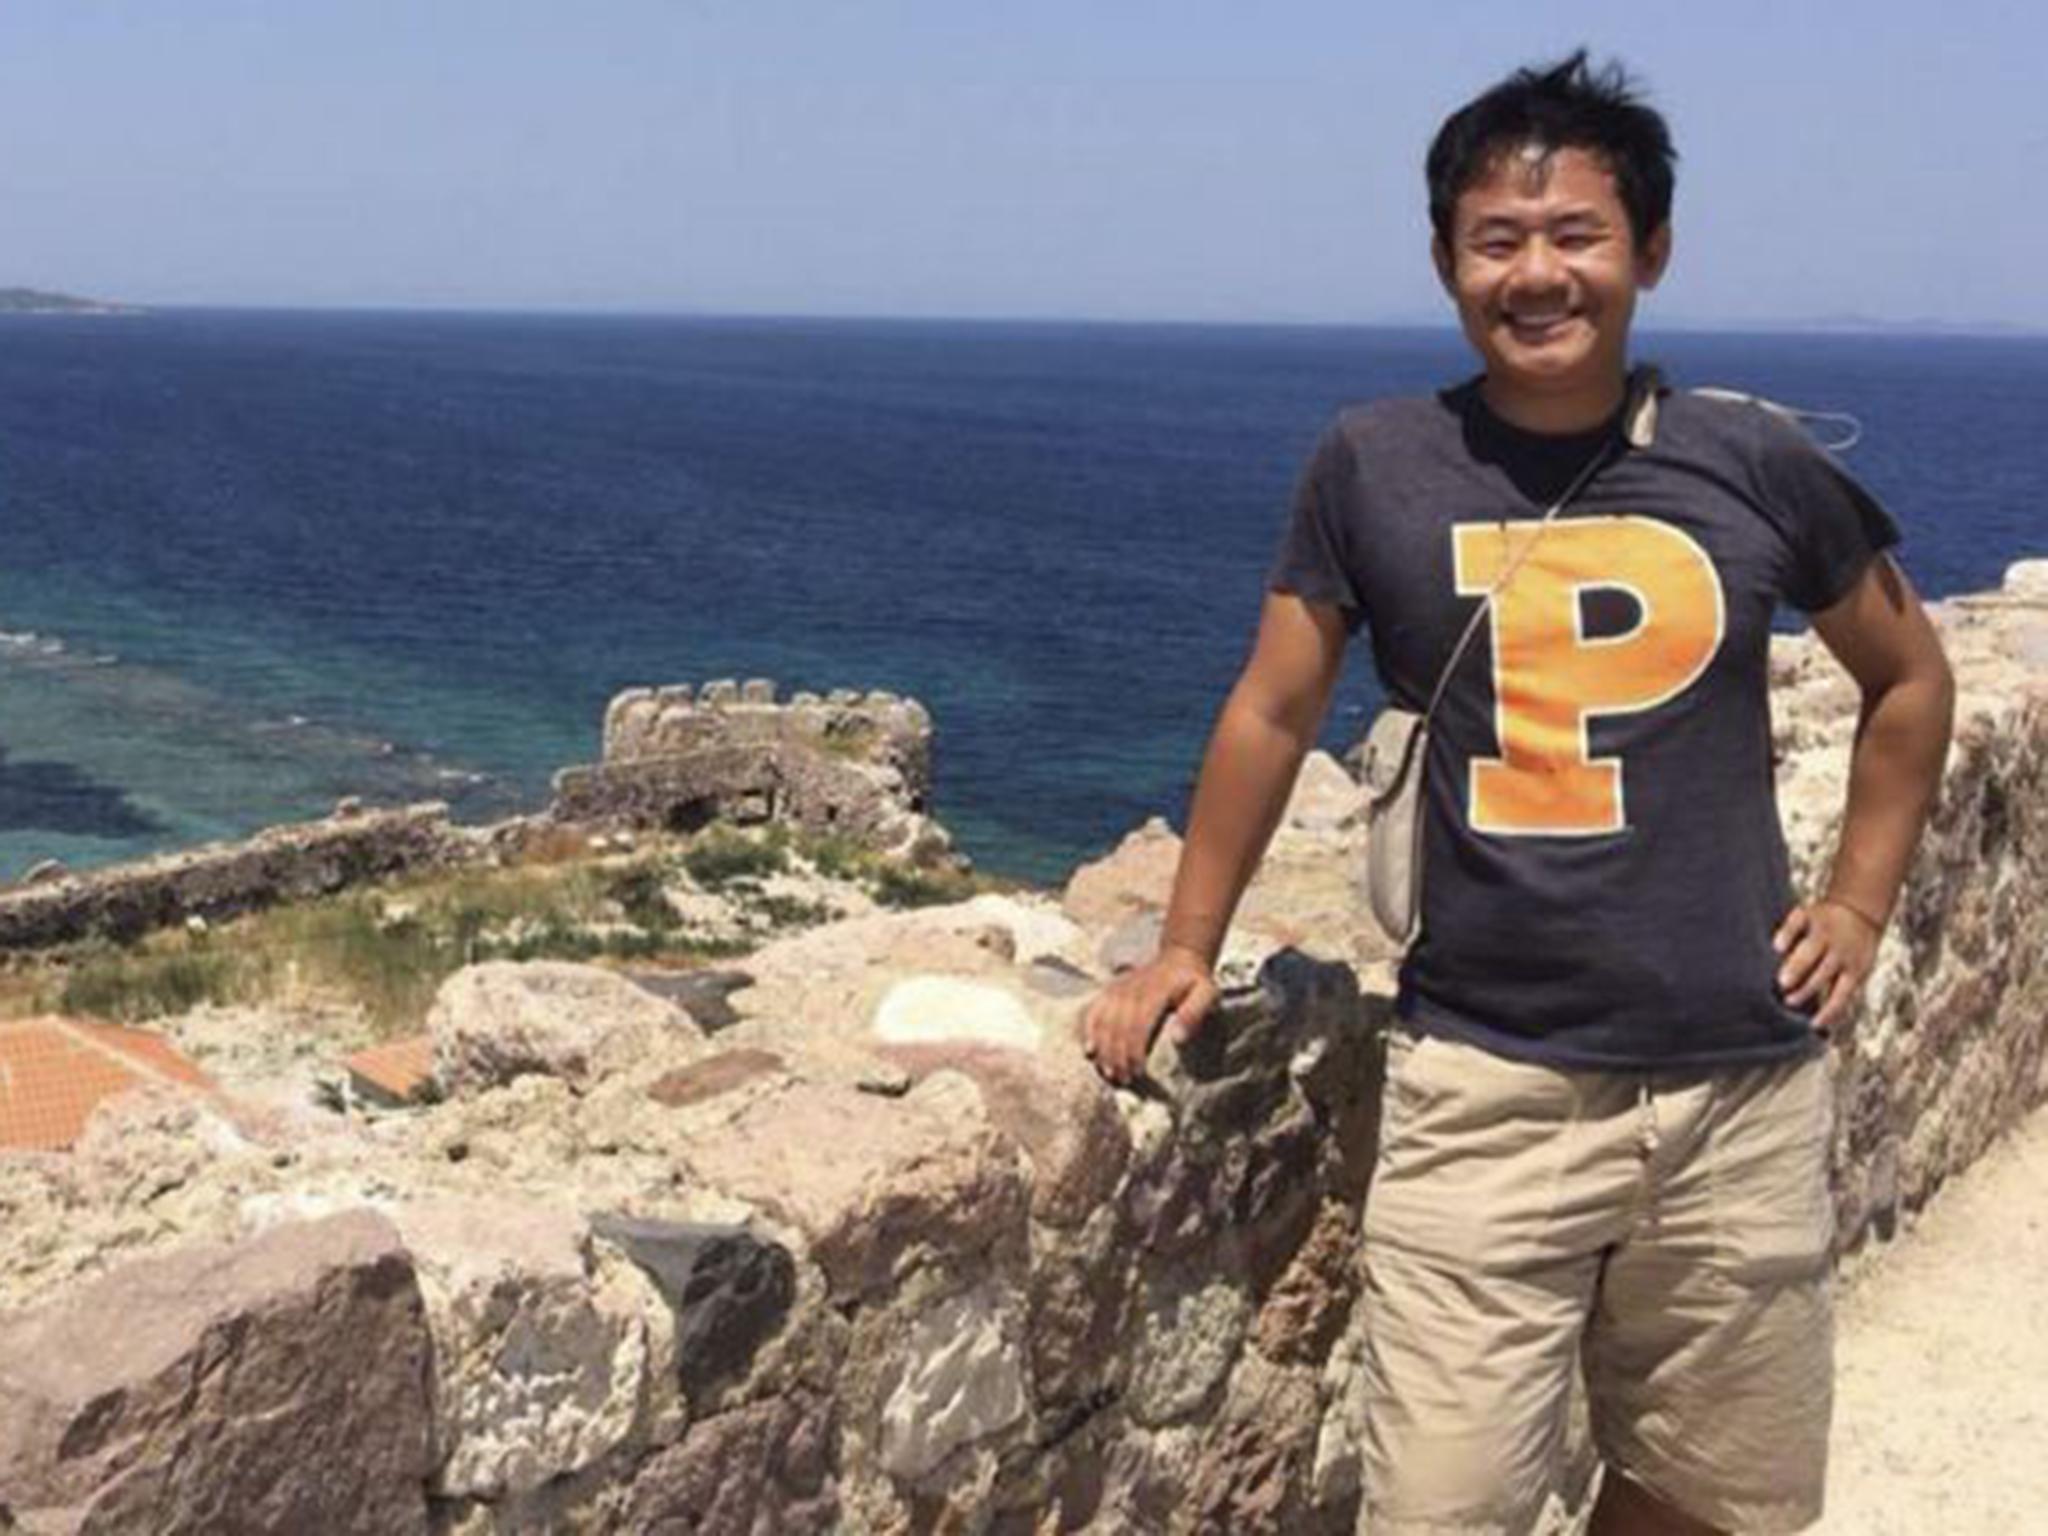 Xiyue Wang, a Chinese-American Princeton graduate student poses for a photo at an unknown location